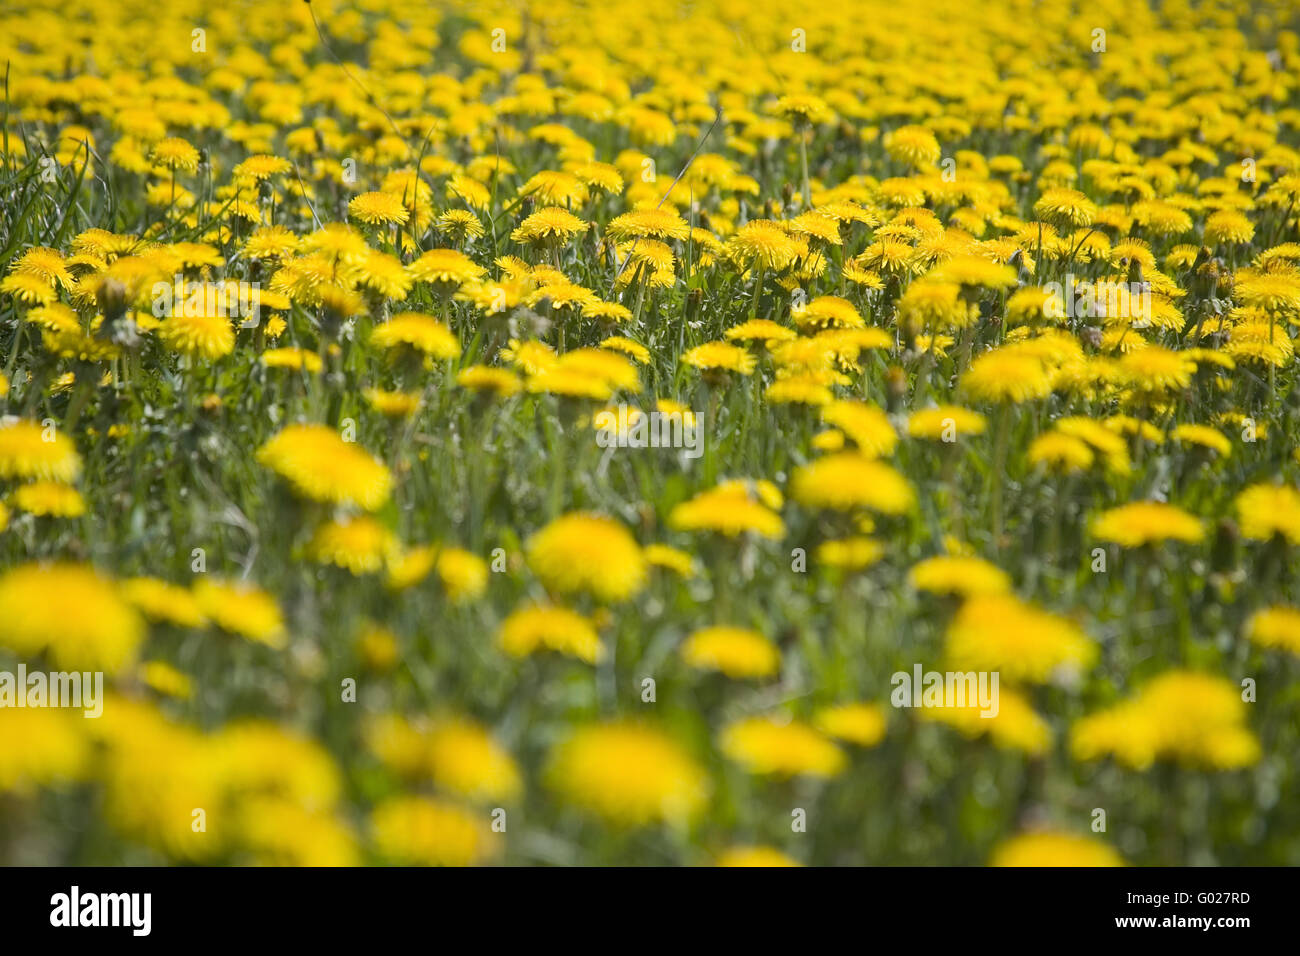 meadow with dandelions Stock Photo